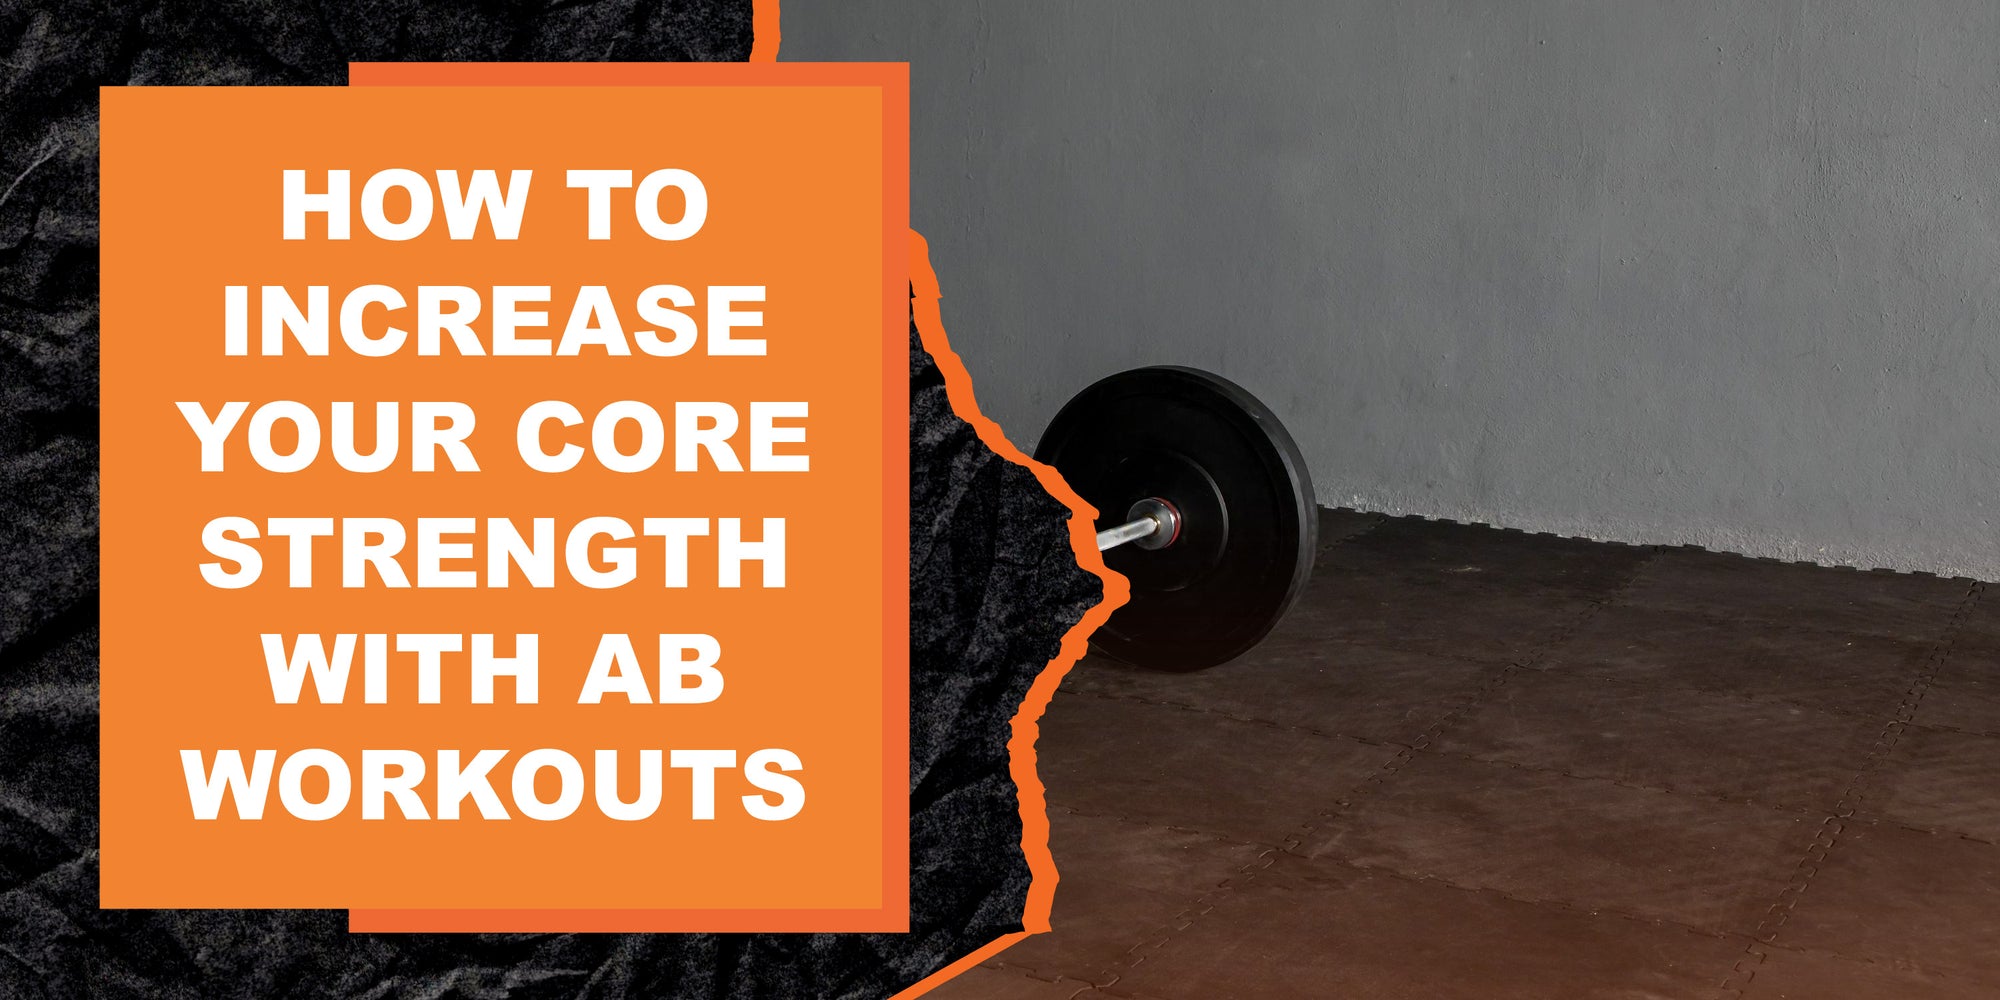 How to Increase Your Core Strength with Ab Workouts